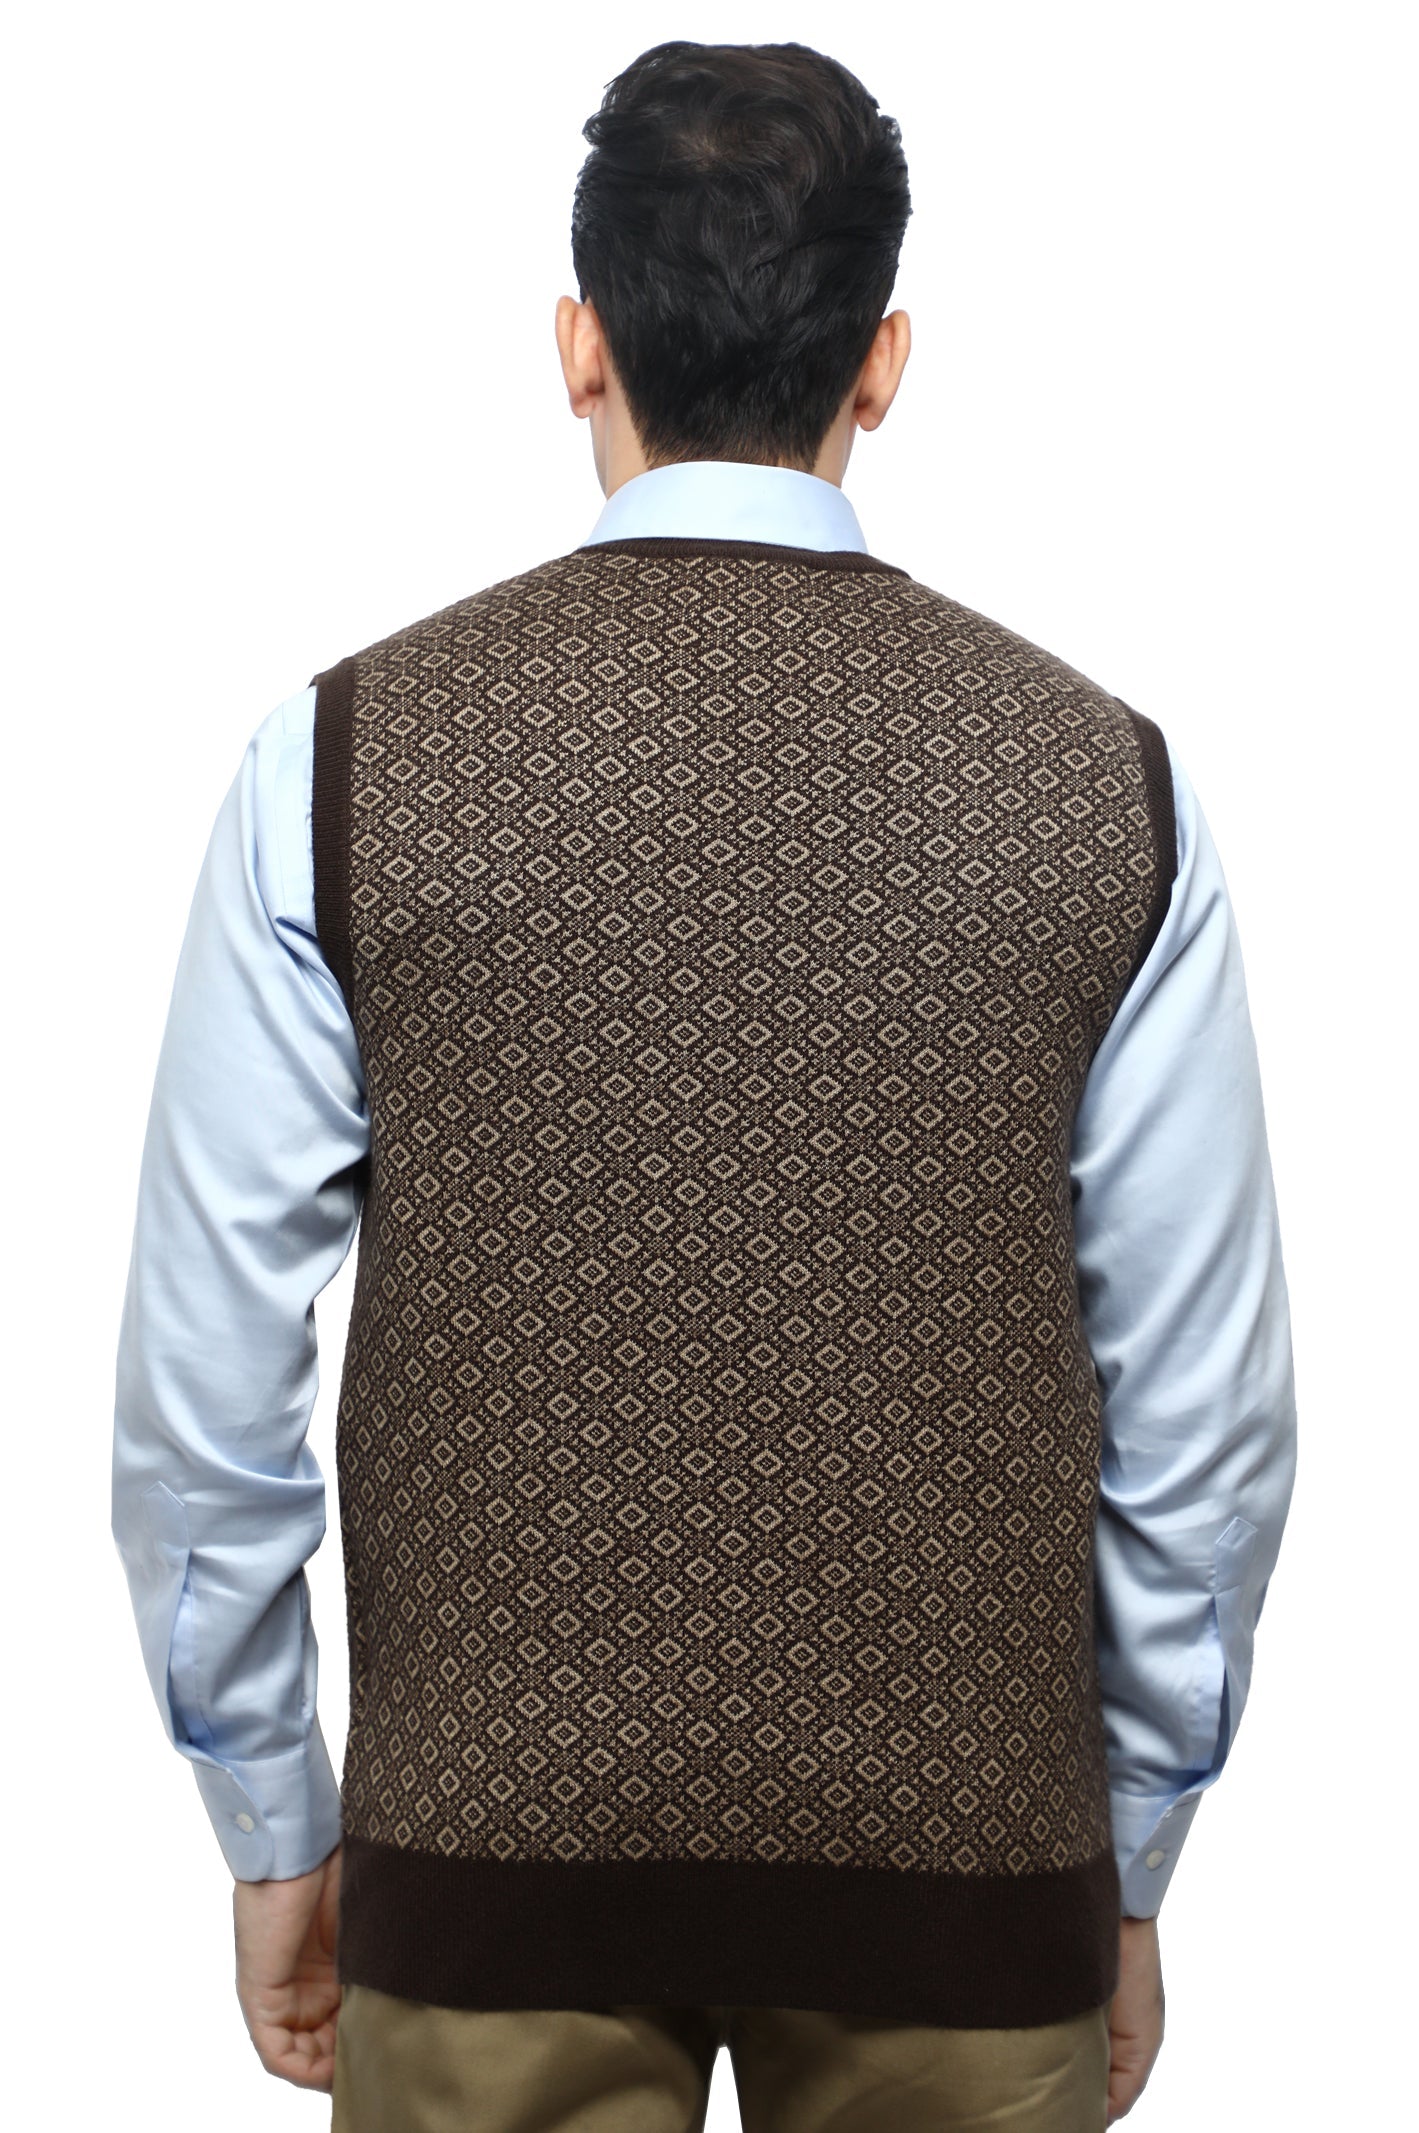 Gents Sweater (Sleeveless) In Brown SKU: SA562-BROWN - Diners